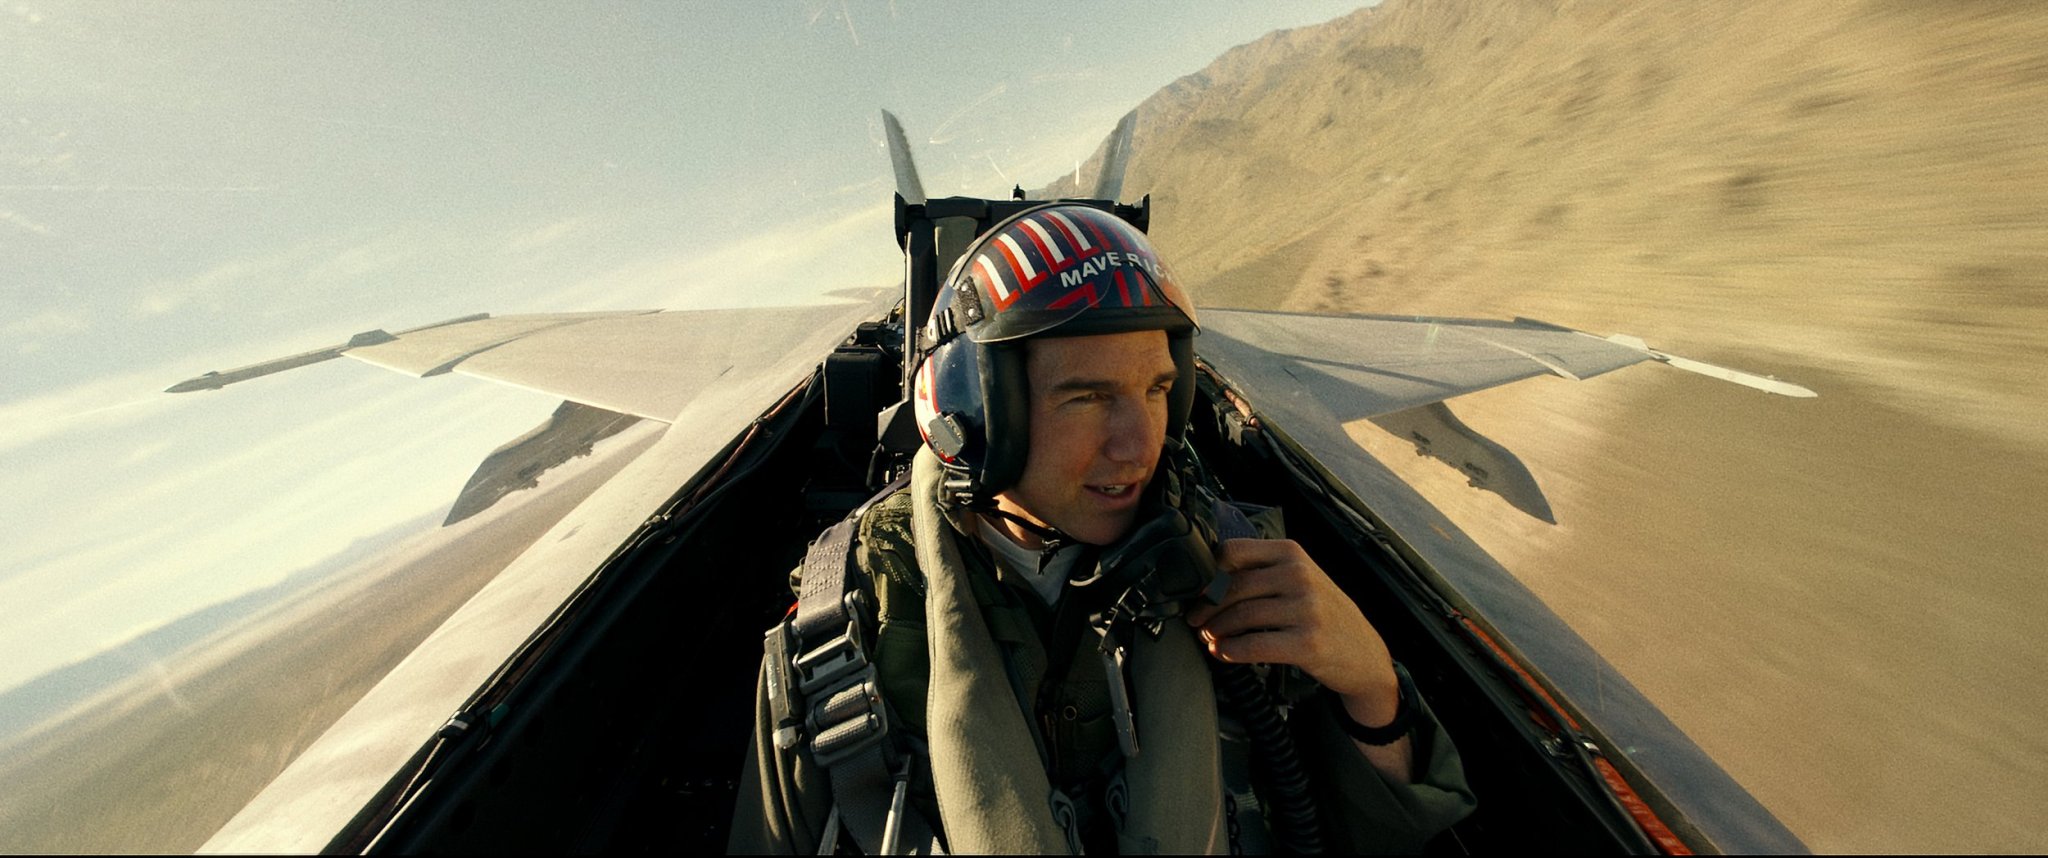 Top Gun: Maverick: The 20 best film sequels of all time, from Toy Story 3 to Back to the Future II